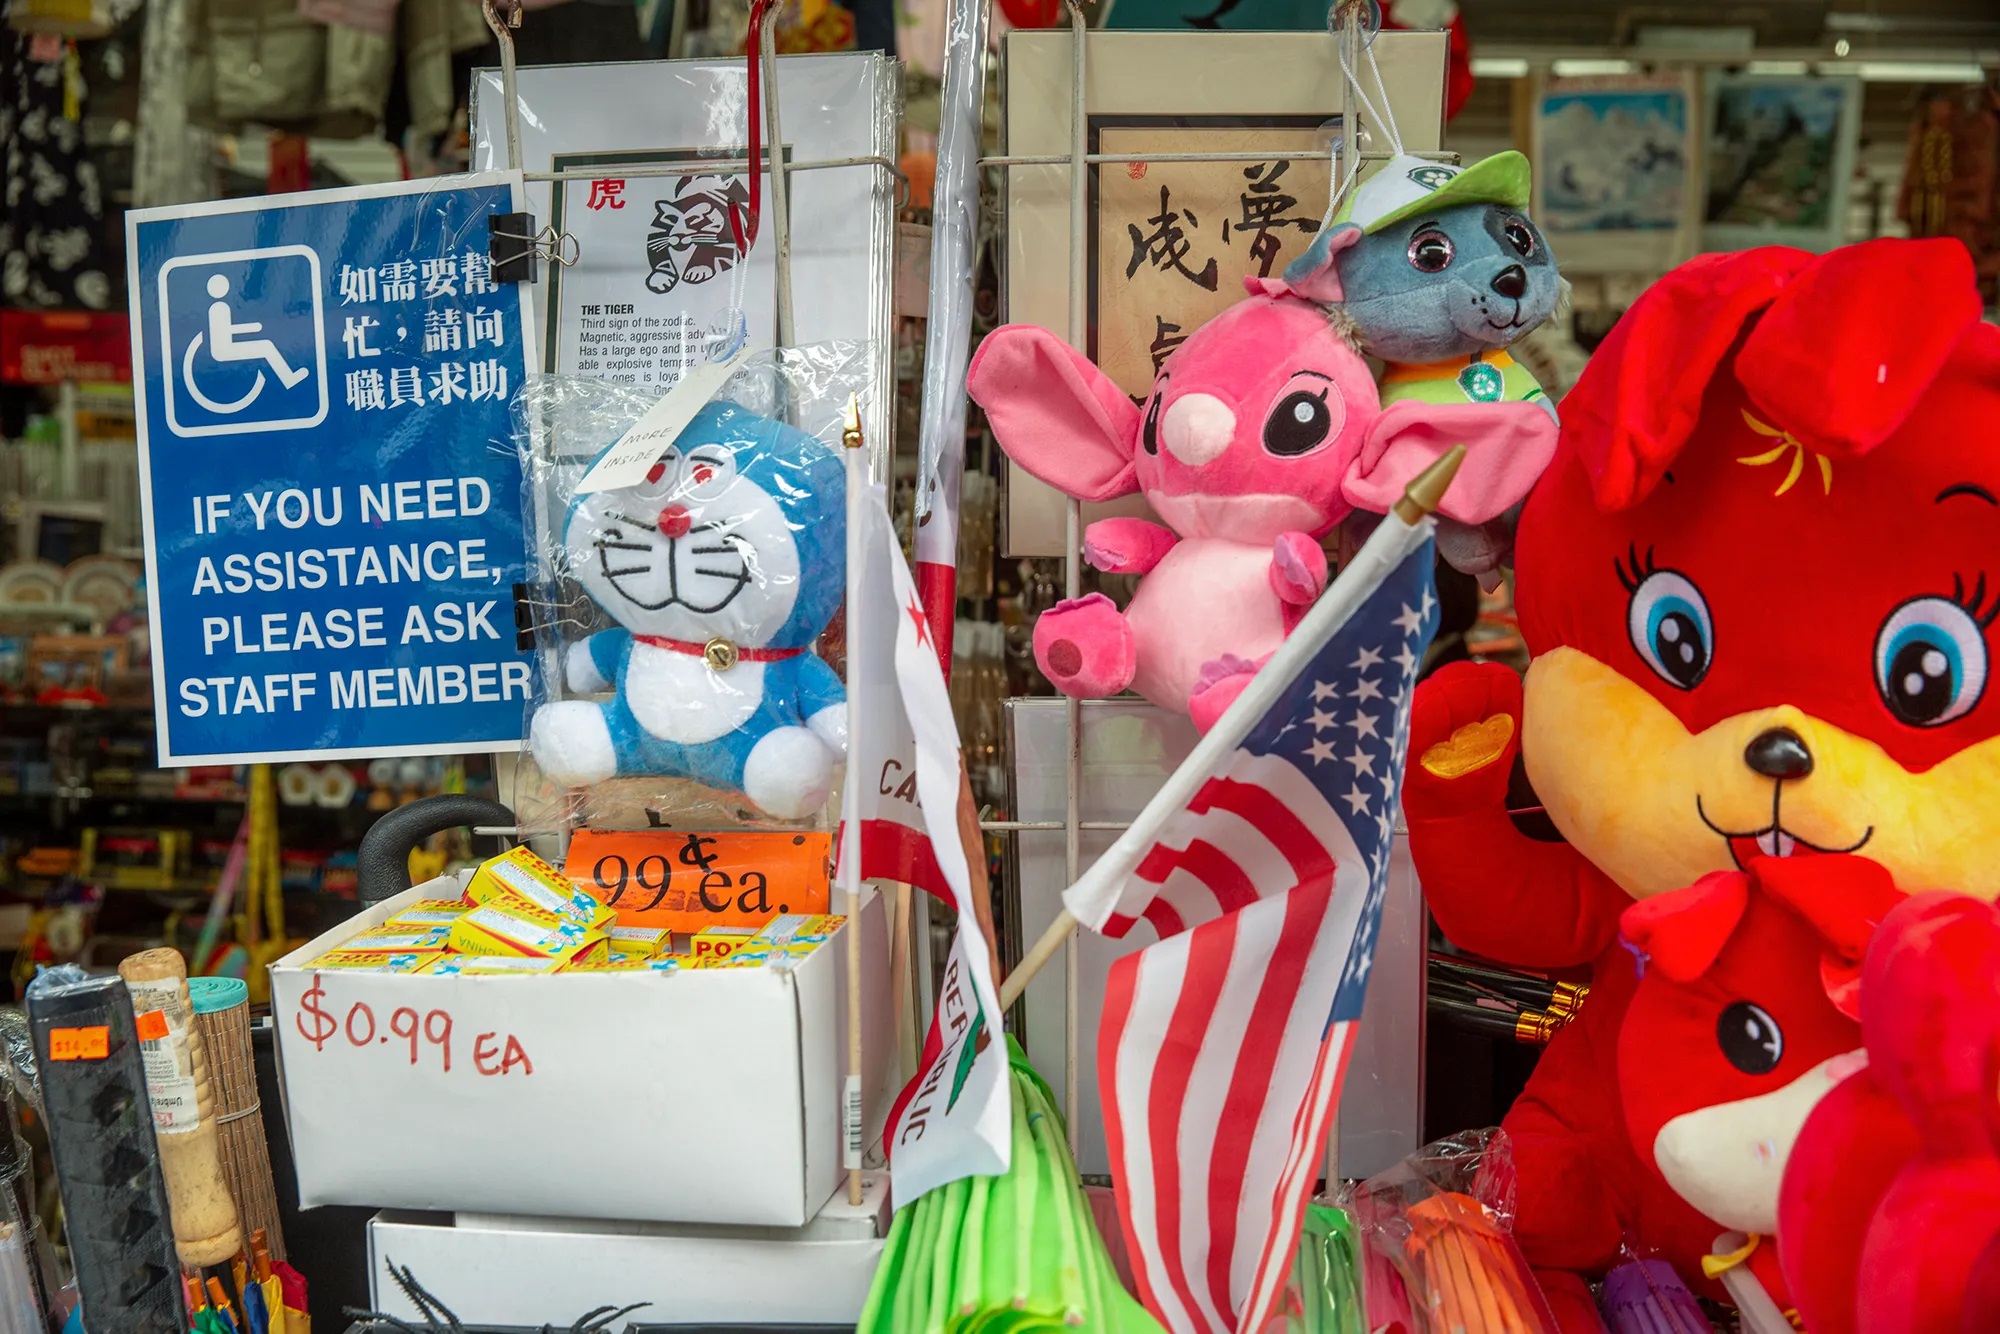 A blue accessibility sign hangs in the window of a building's entrance next to a variety of colorful, stuffed animals on display.